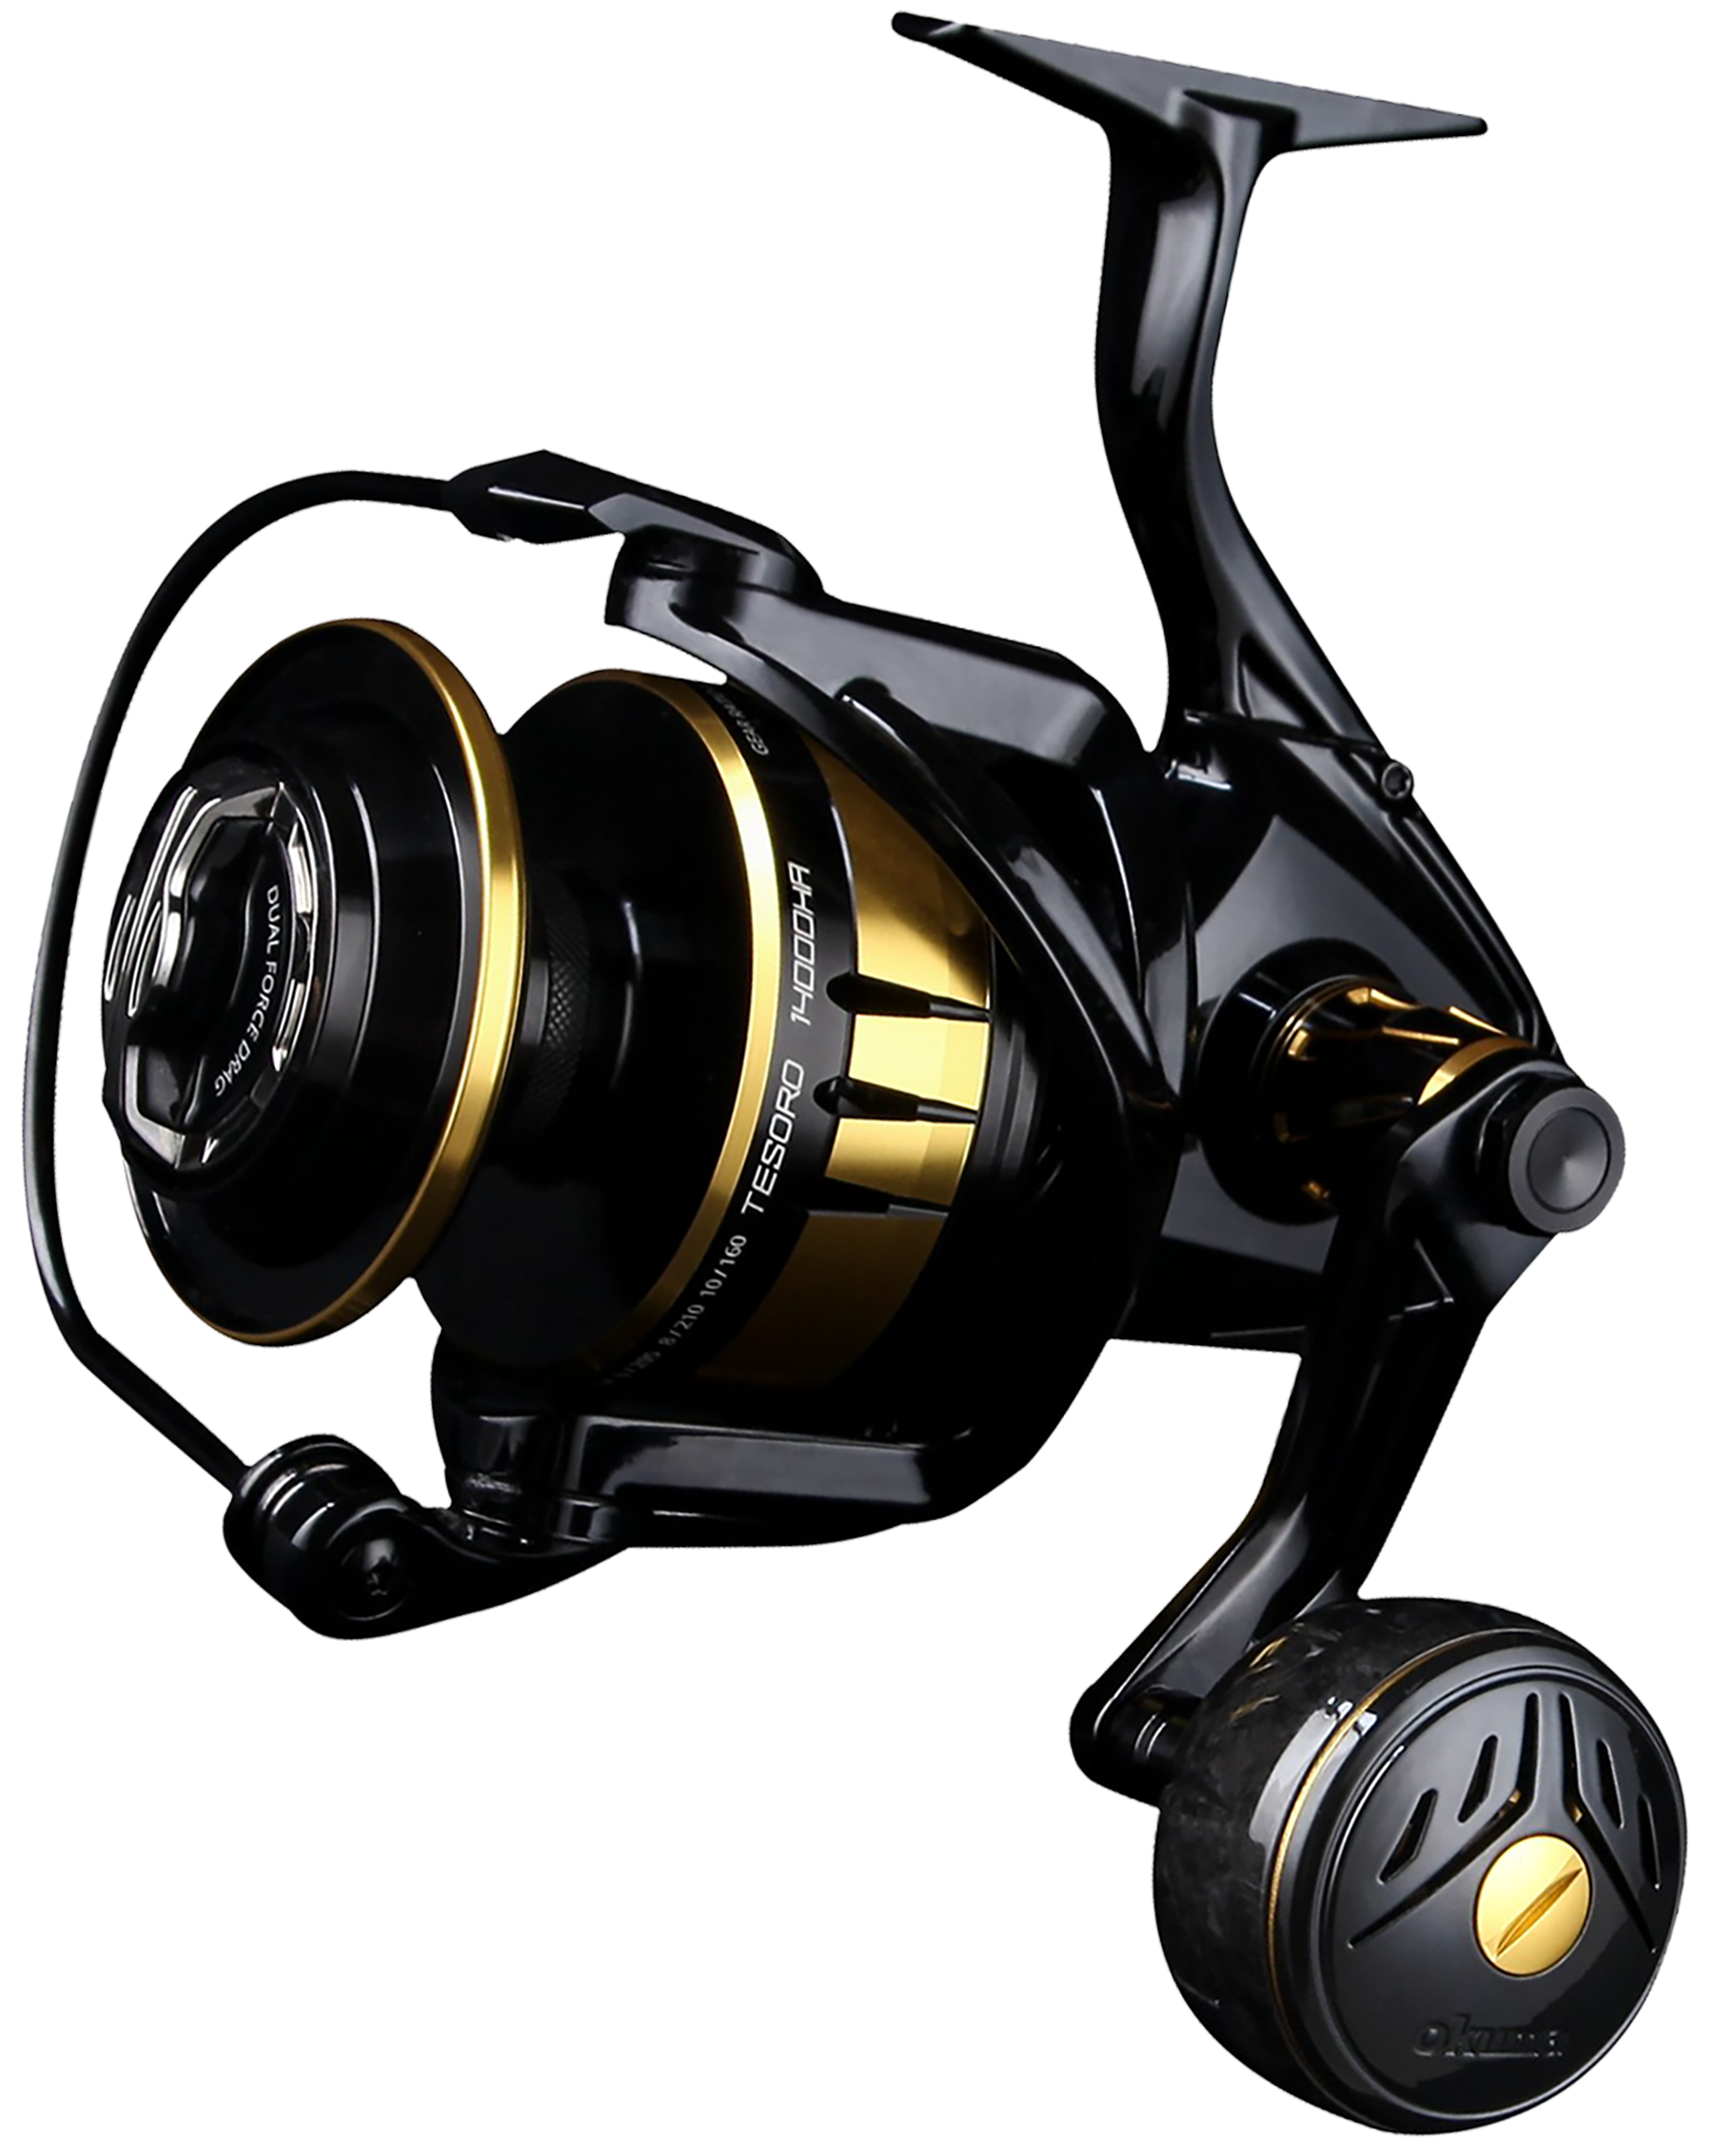 Fishing equipment Spinning Fishing Reel 12+1 Bearings Left Right  Interchangeable Handle for Fishing with Double Drag Brake System fishing  gear